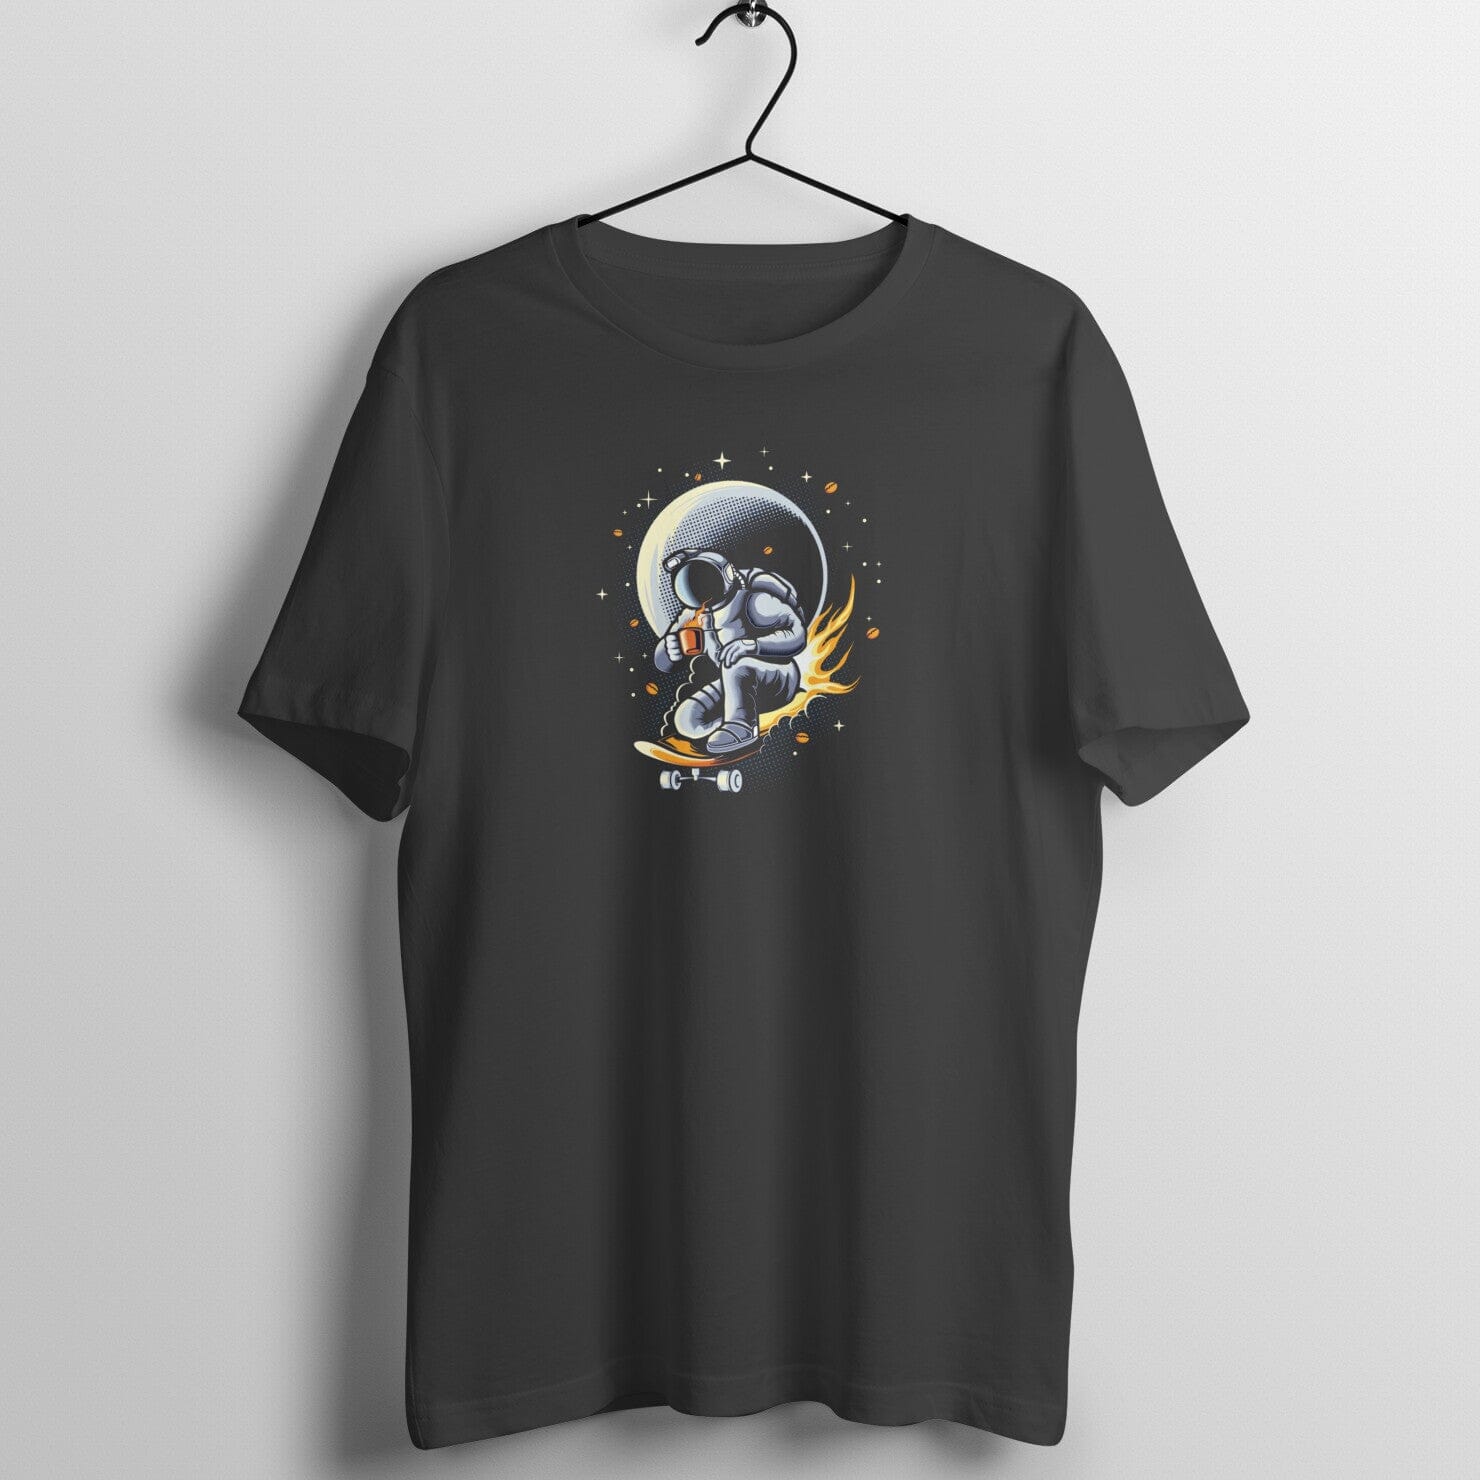 Astro Coffee Exclusive Black T Shirt for Men and Women Printrove Black S 